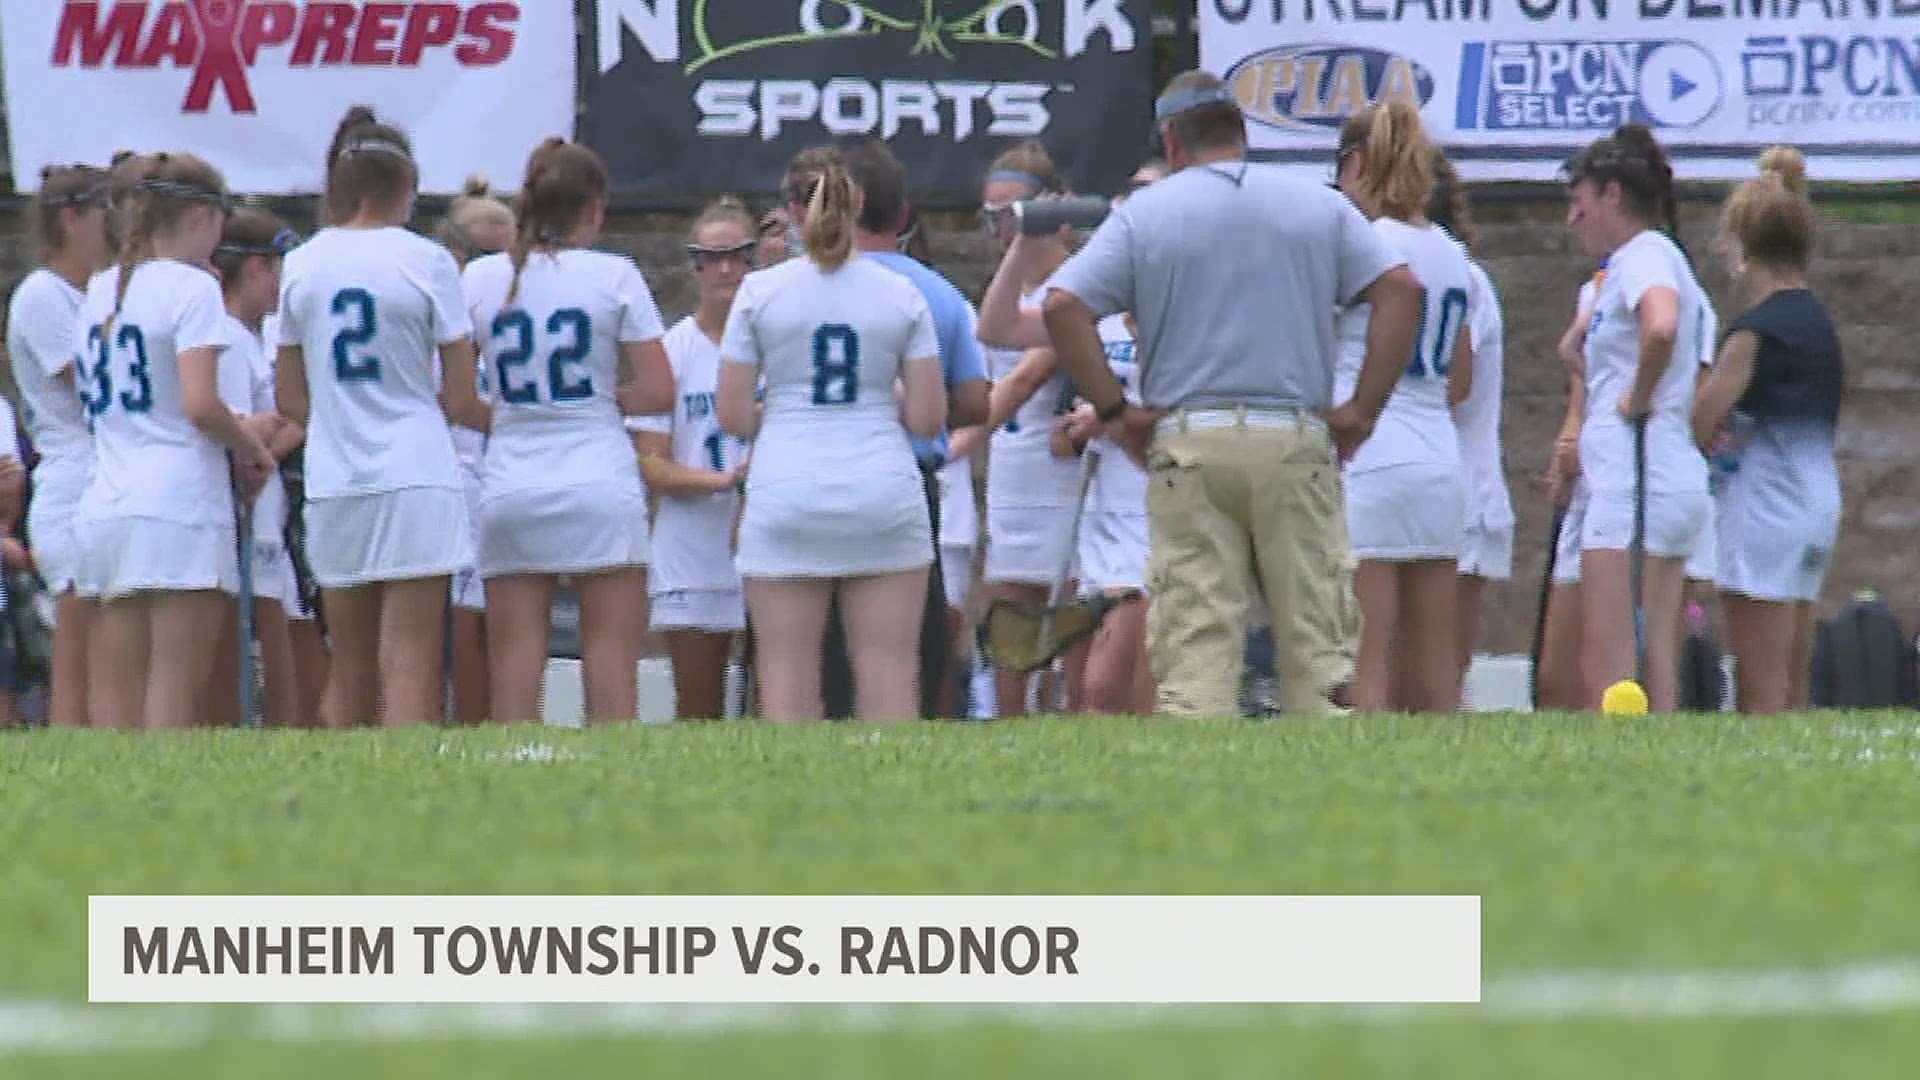 Manheim Township falls in state final to Radnor in 3A girls Lacrosse final finishing third year as state runner-up